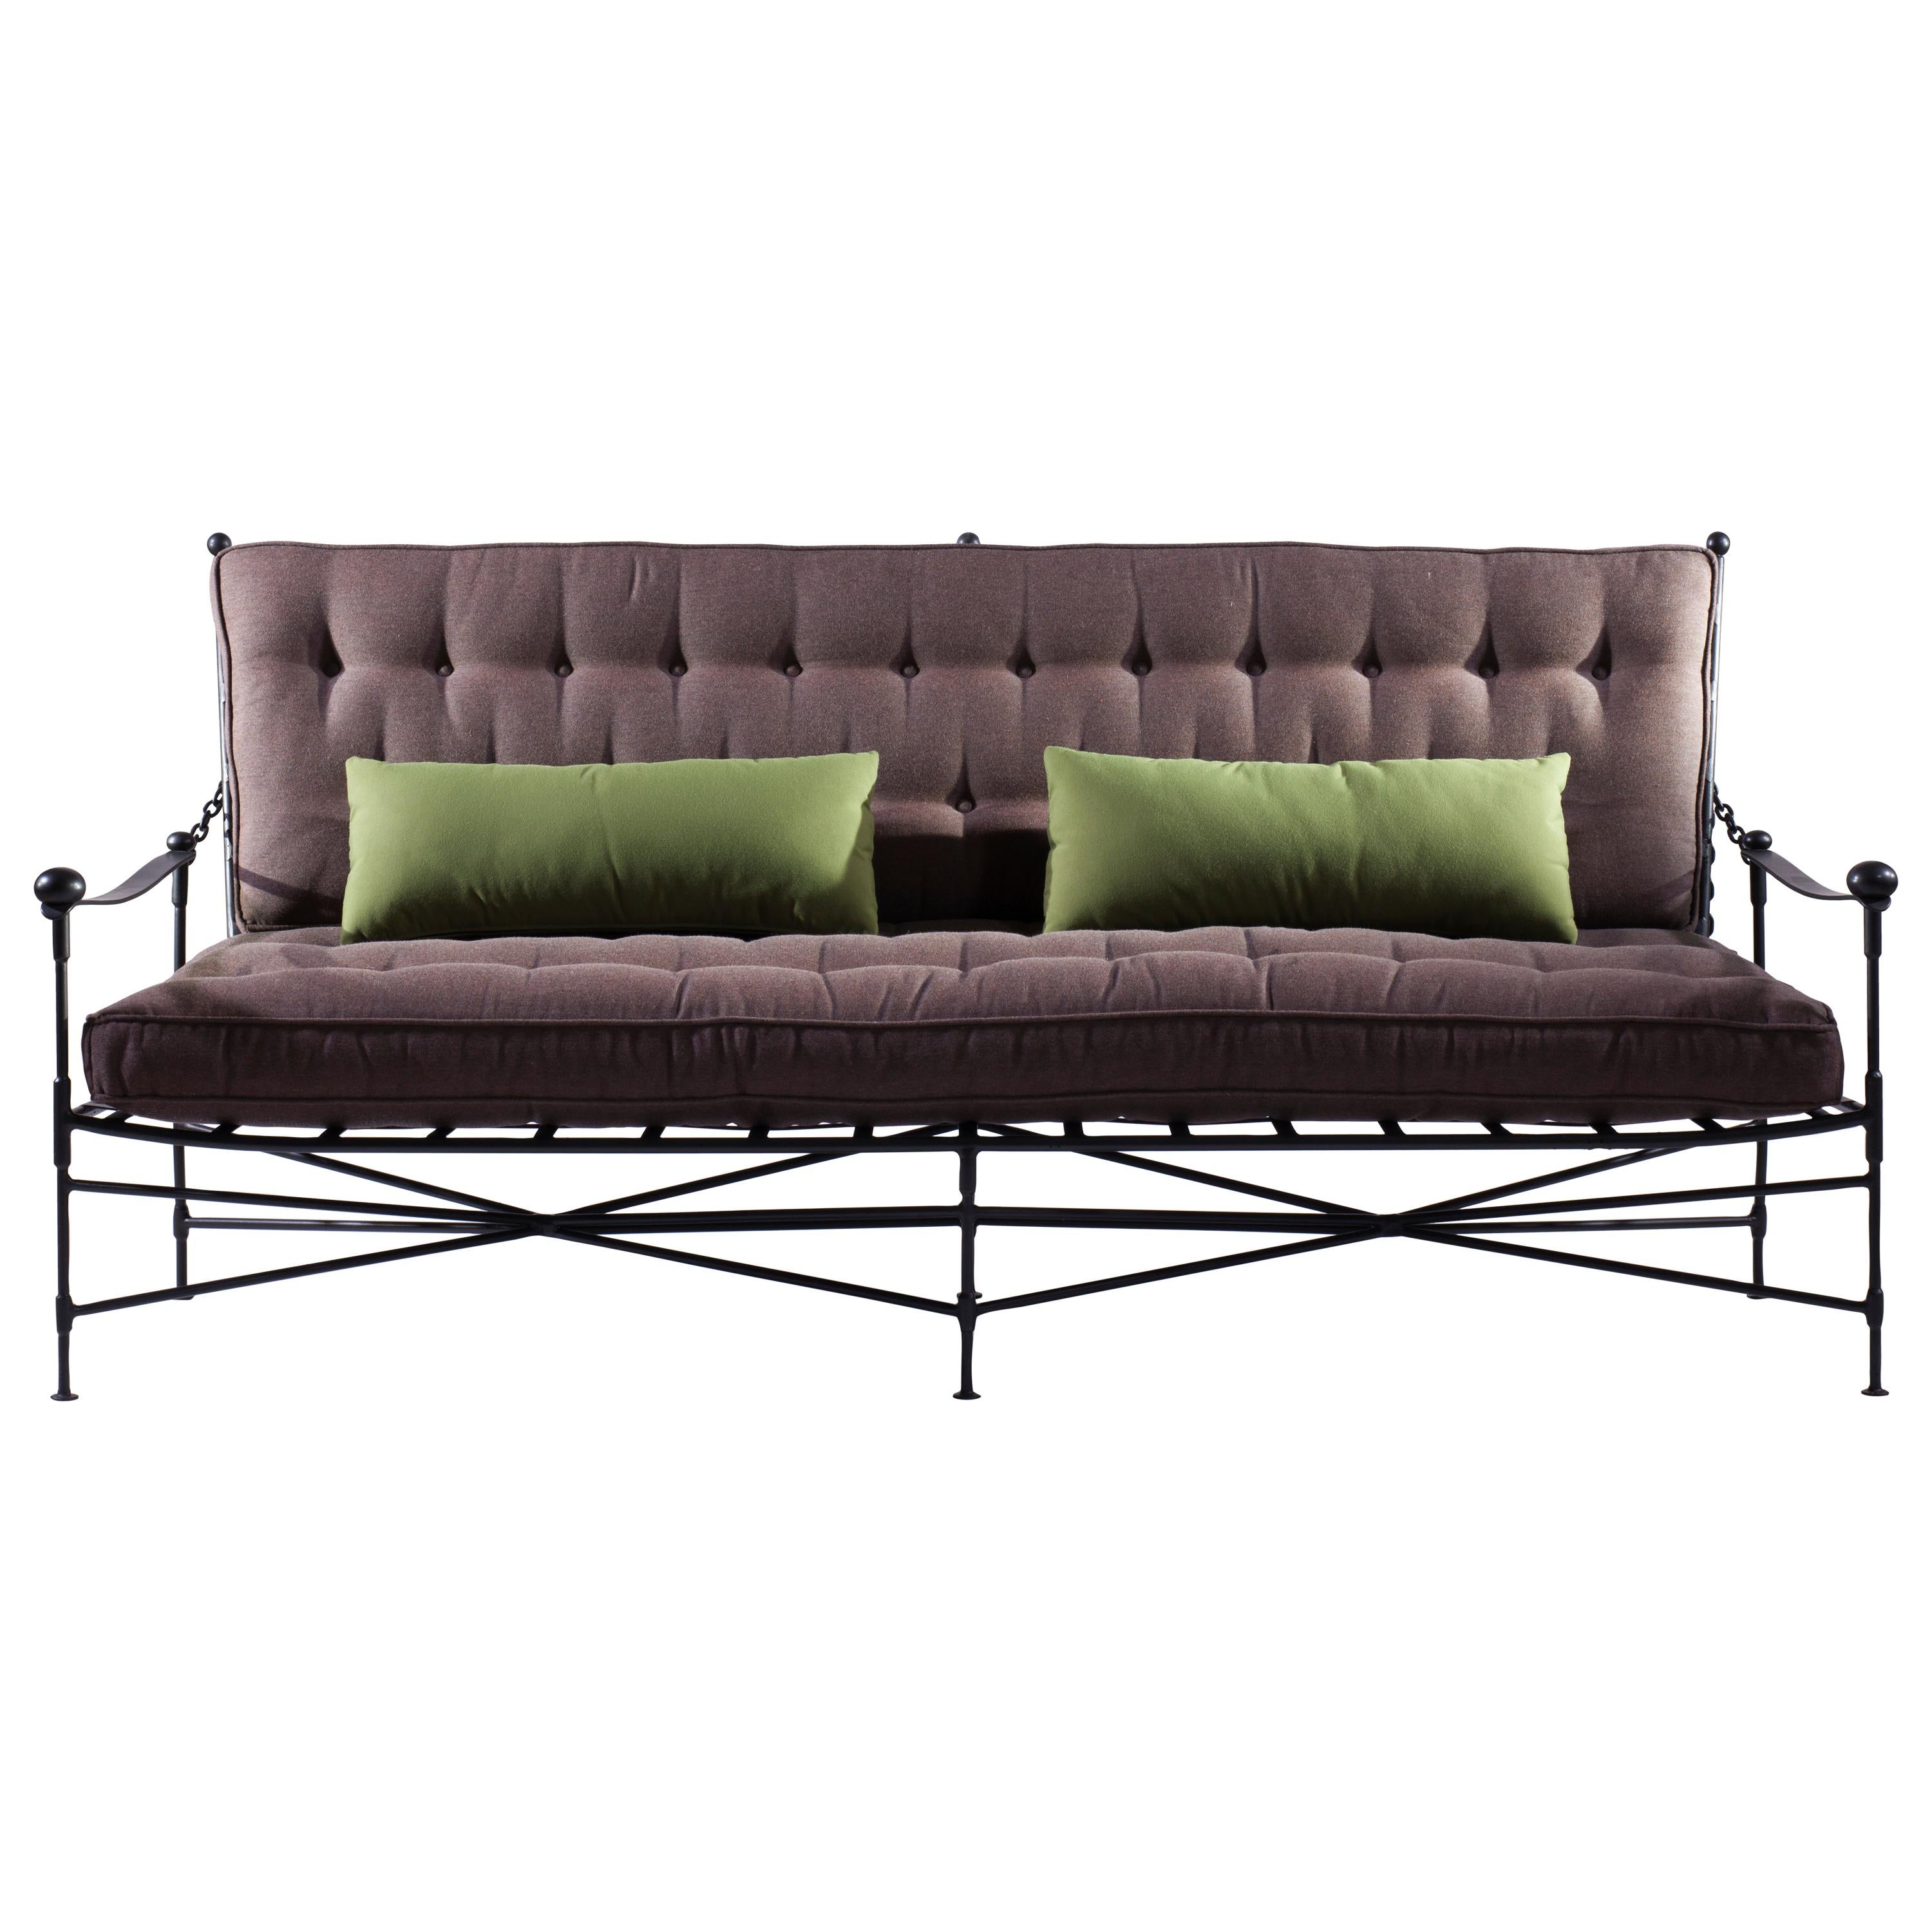 Classic Garden Sofa-Classic Steel Frame Sofa with Buttoned Cushions